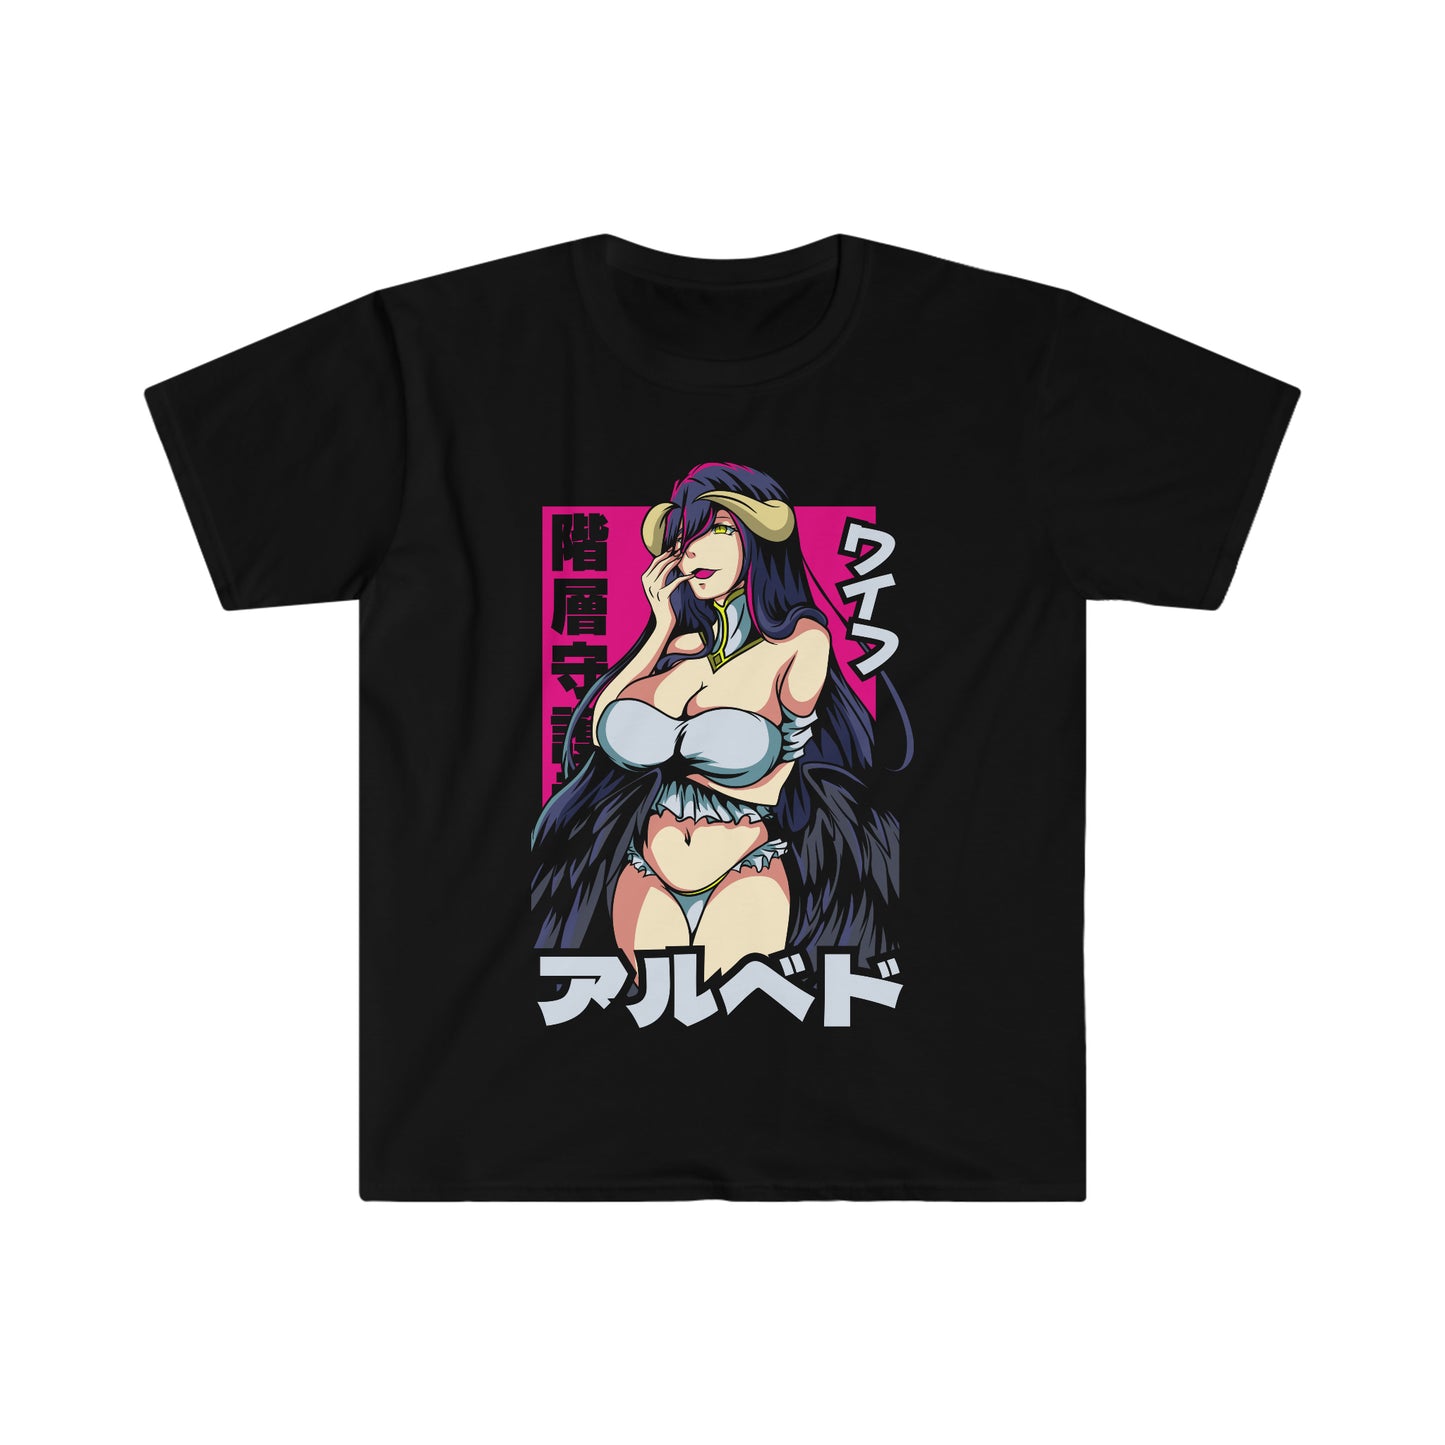 Overseer of the Guardian Waifu Collection T-Shirt